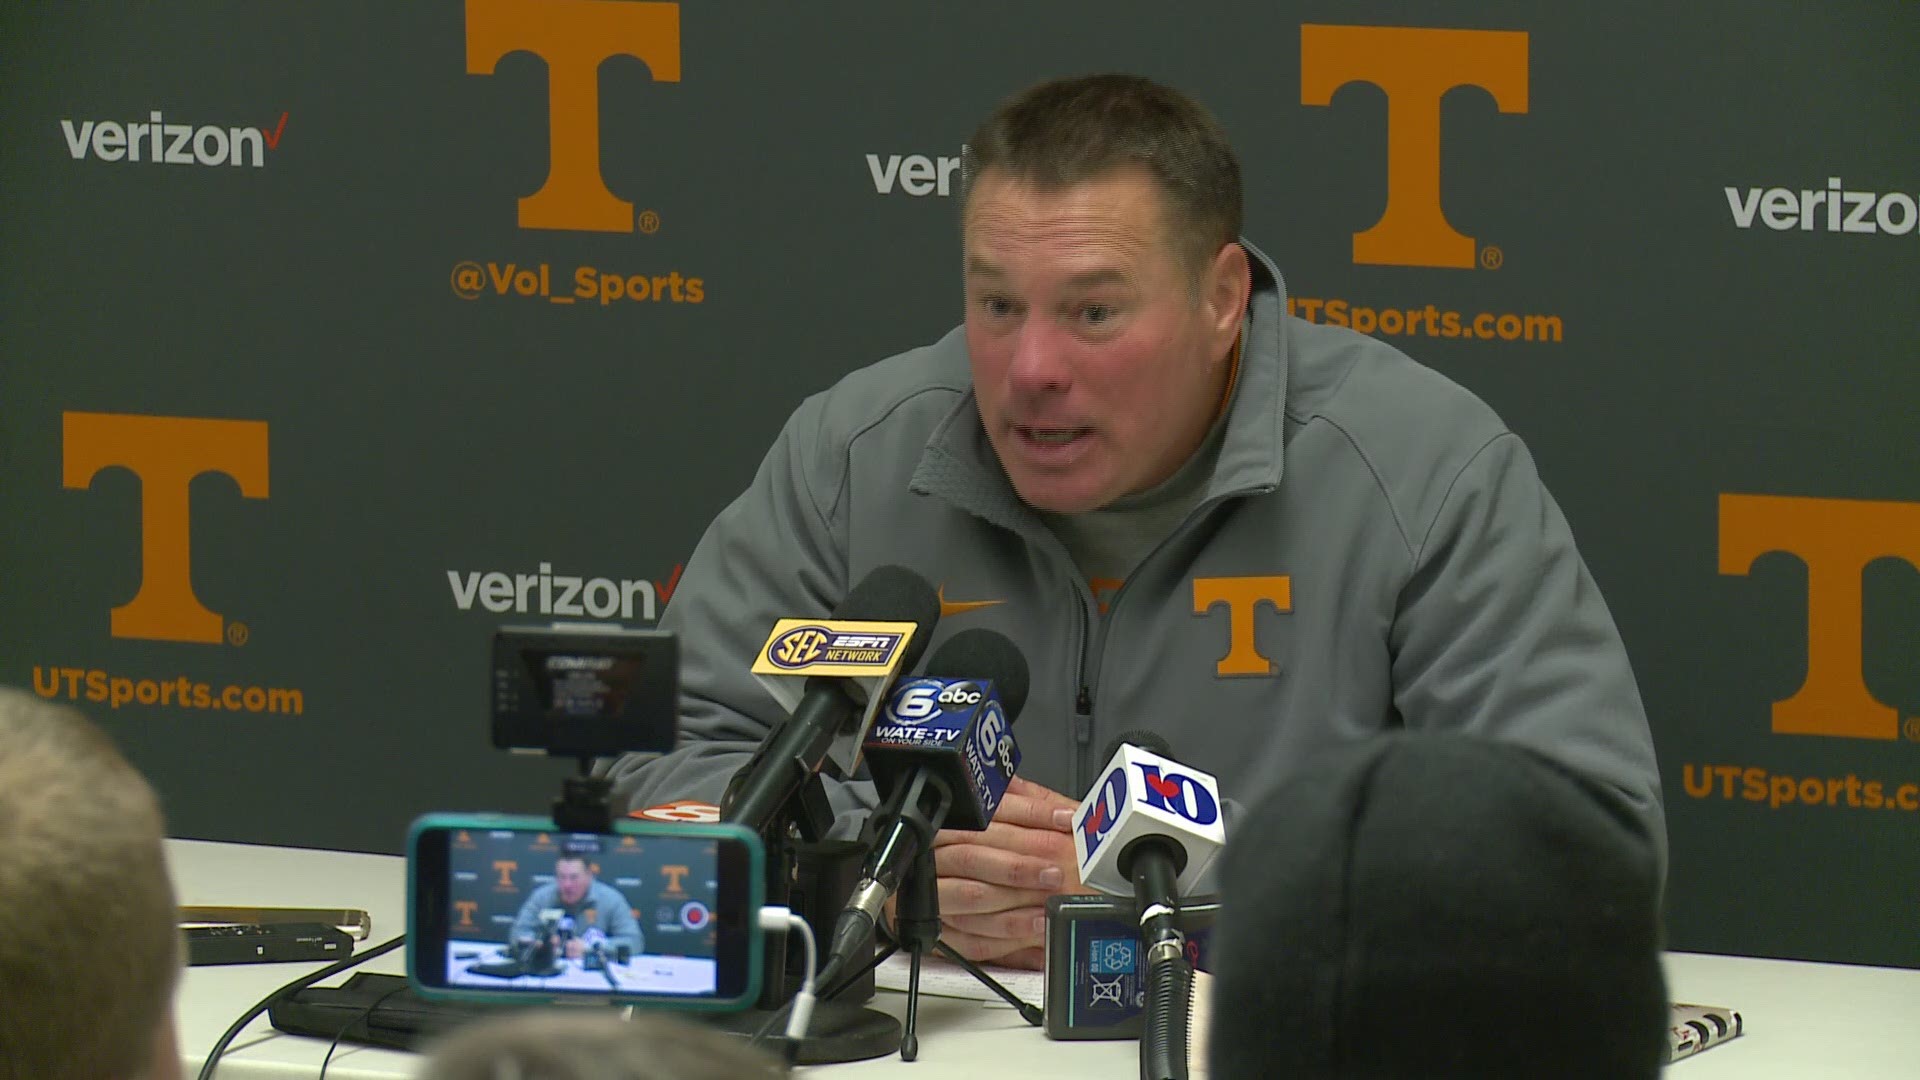 After the loss to Kentucky, Butch Jones "absolutely" believes he has the support of Athletics Director John Currie.